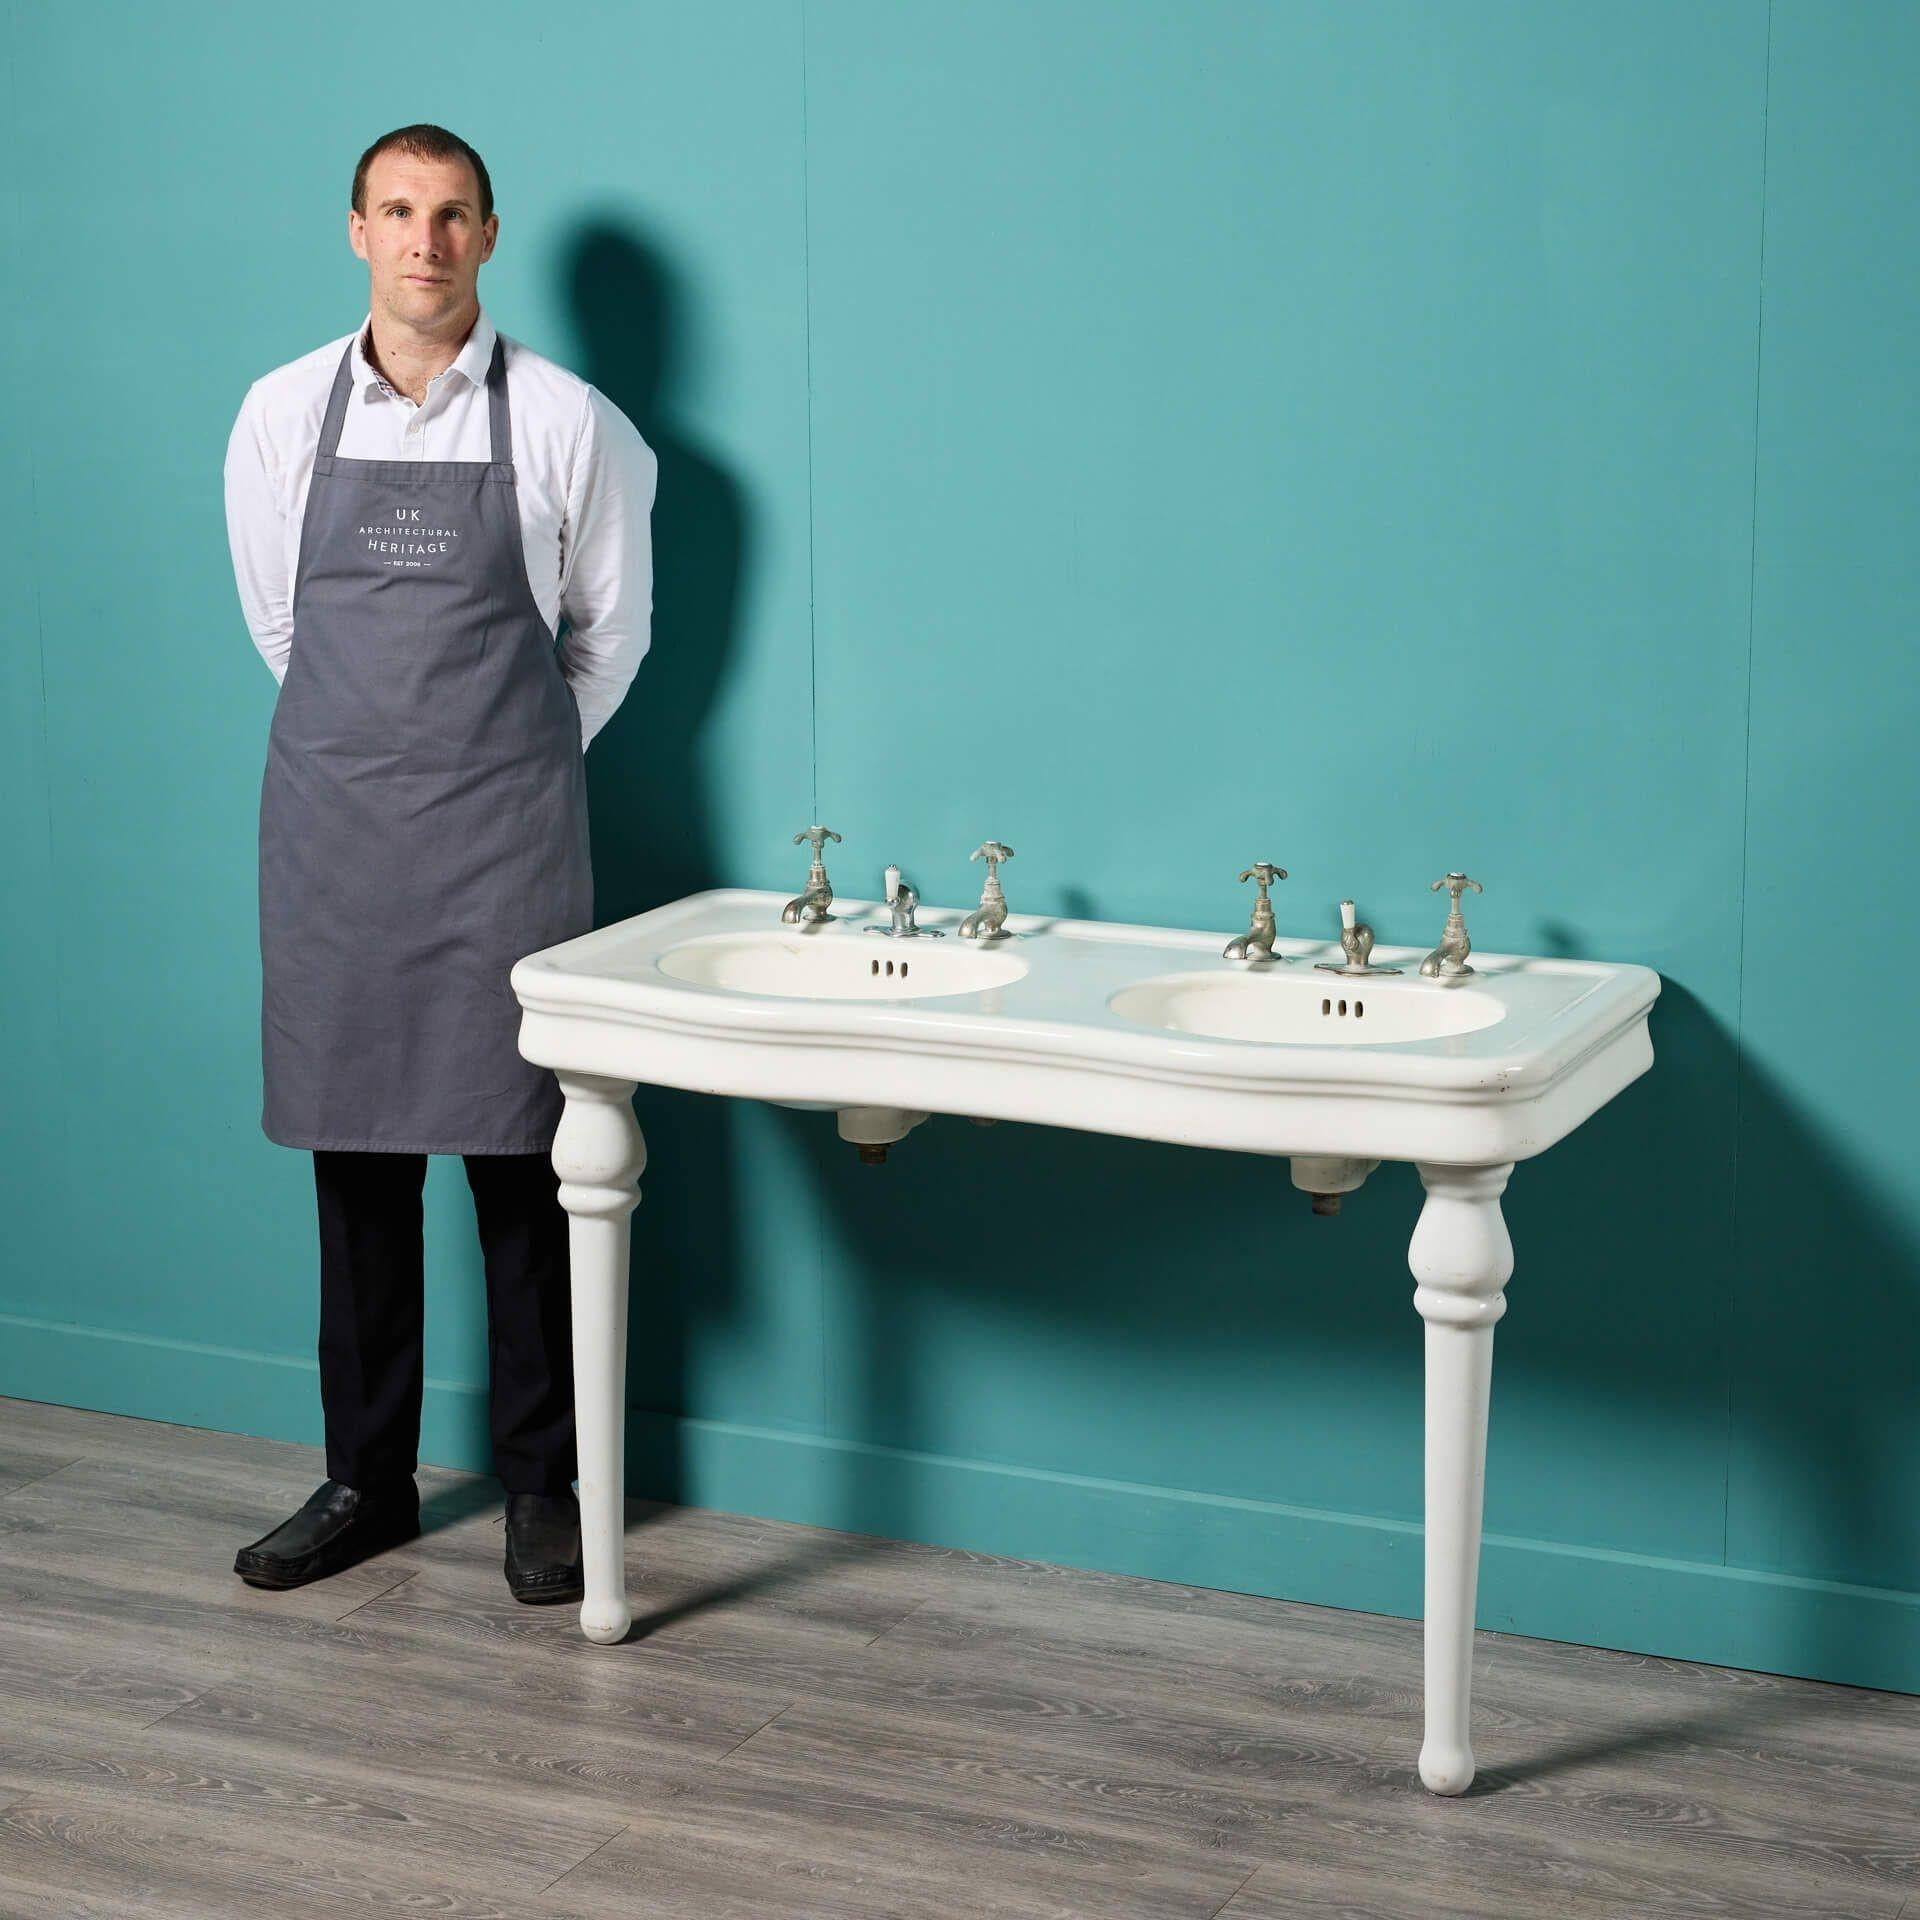 An early 20th century antique French double sink with porcelain legs. Supported by two sleek ceramic legs, this fashionable large scale sink displays elegance with its white glazed finish and curved shape; all while incorporating a range of styles